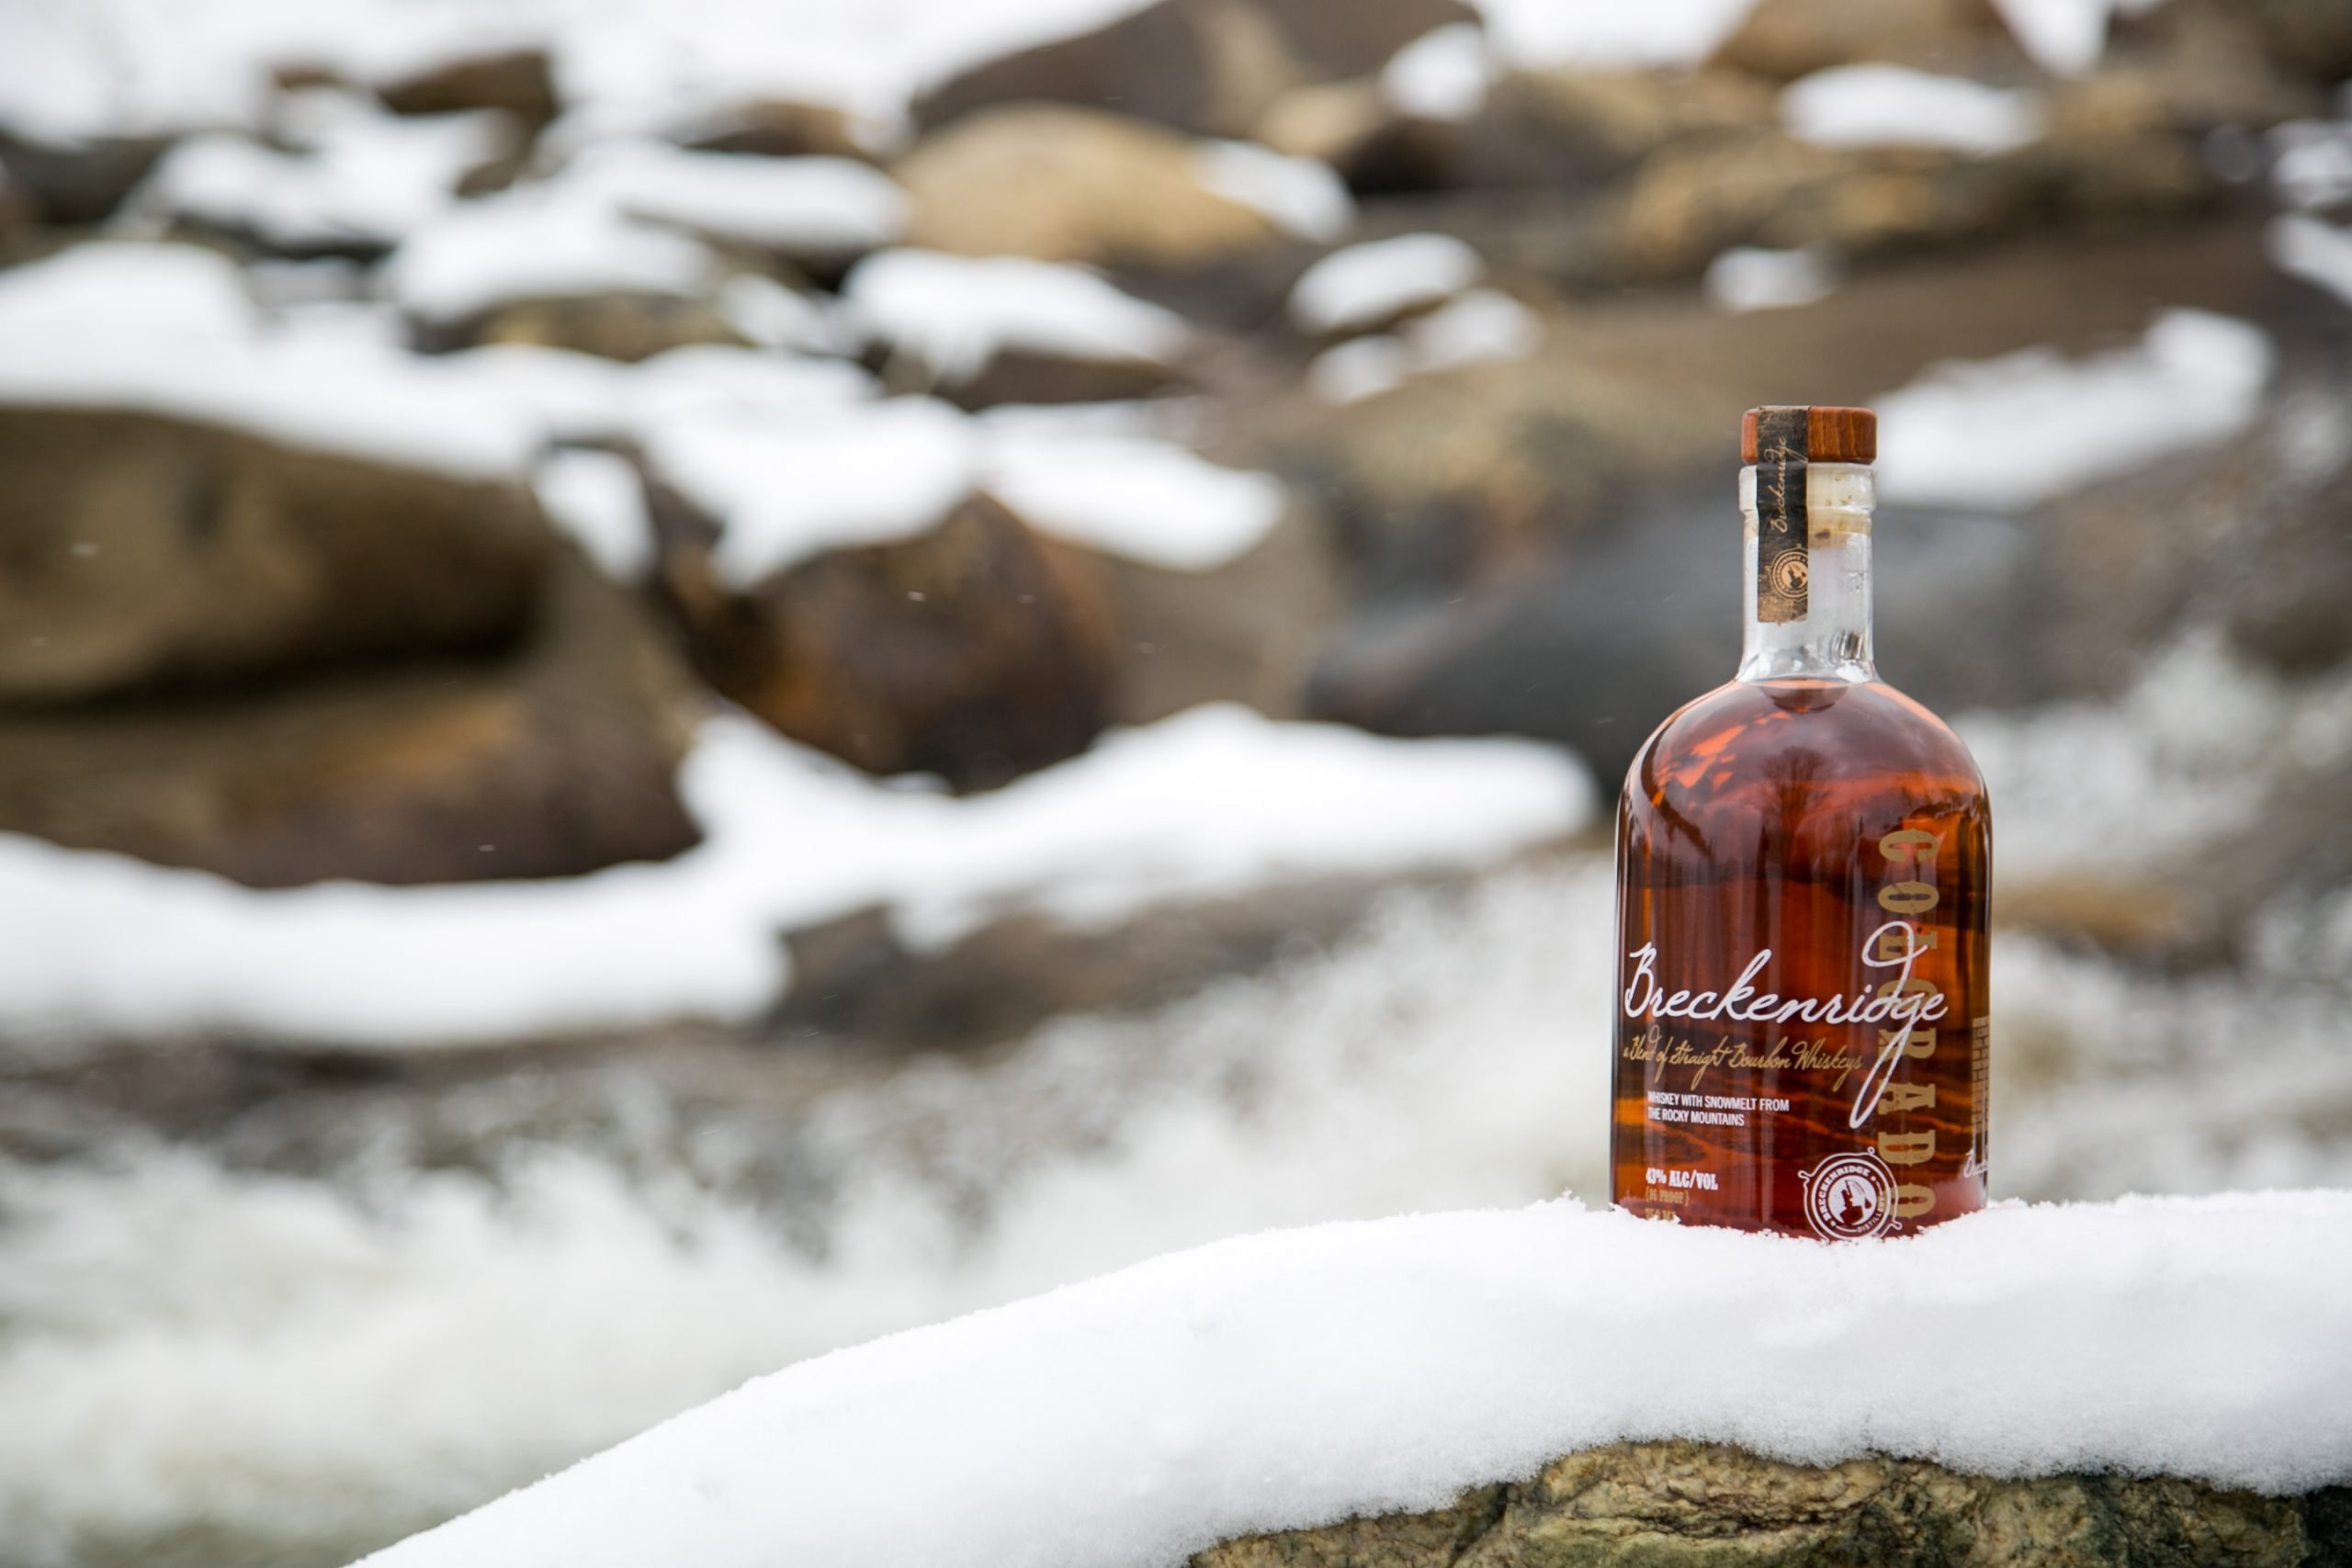 Breckenridge is as at home in the mountains as it is in your home bar. Photo courtesy of Breckenridge